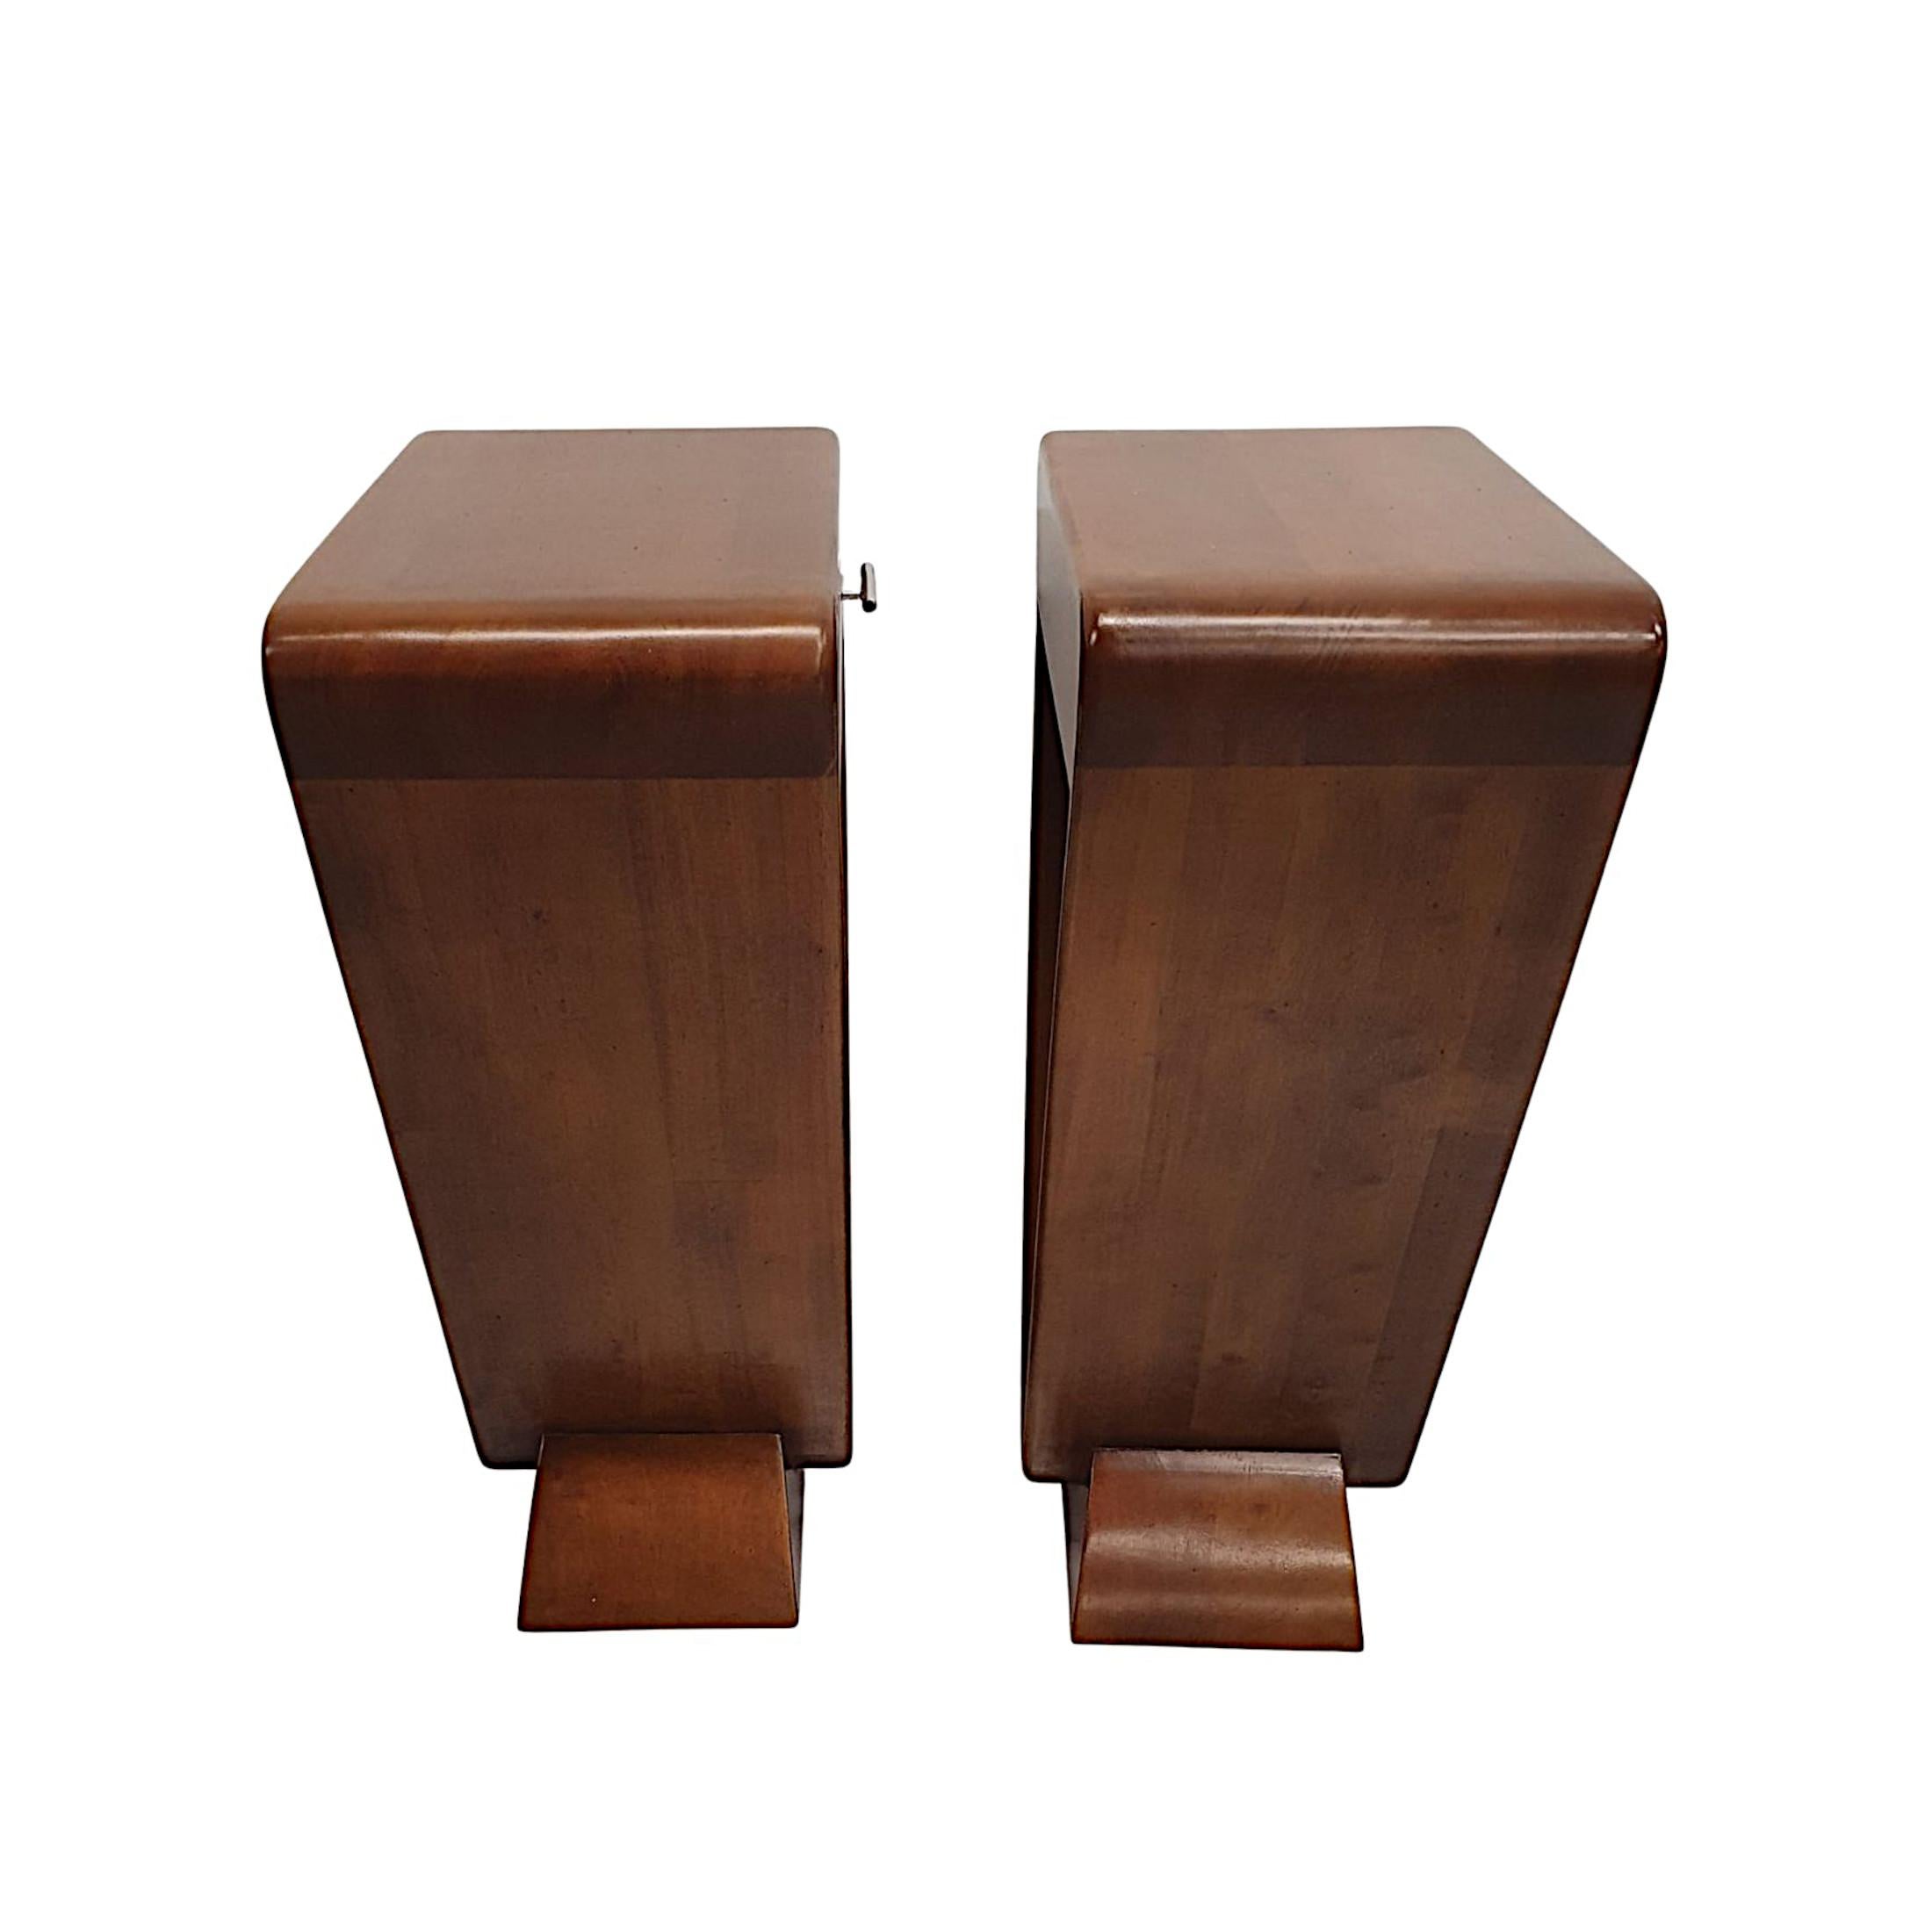 Contemporary Fabulous Pair of Bedside or Side Tables in the Art Deco Style For Sale